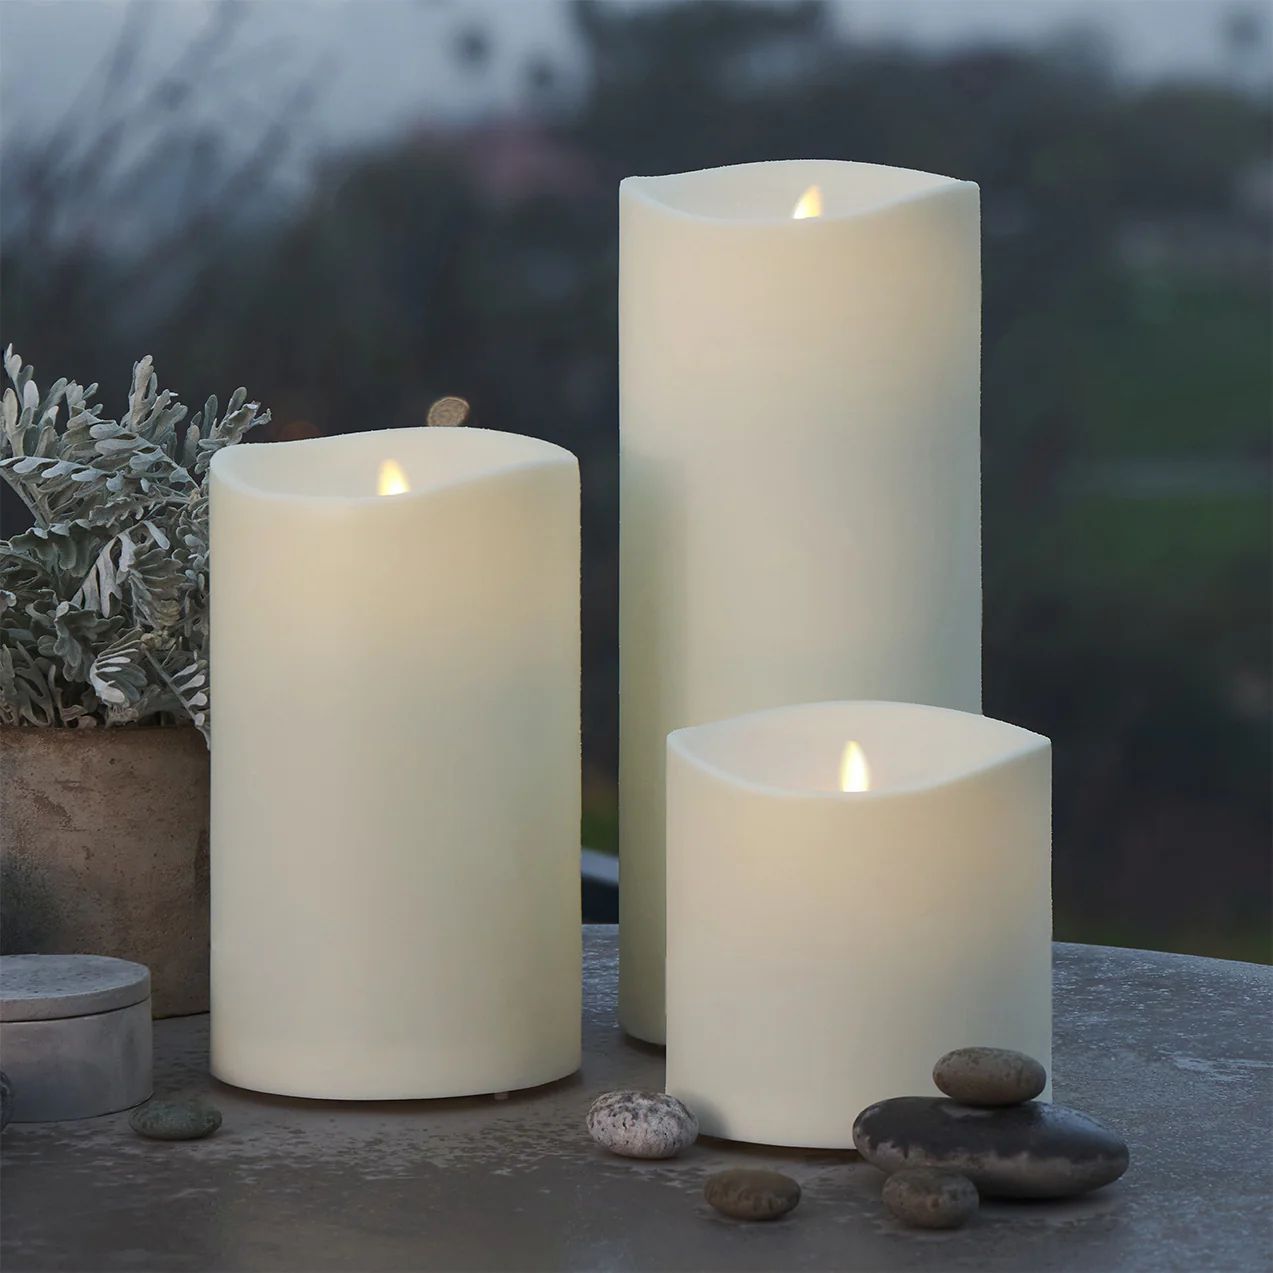 Pearl Ivory Outdoor Flameless Candle Grand Pillar with Remote - Melted Top | Luminara